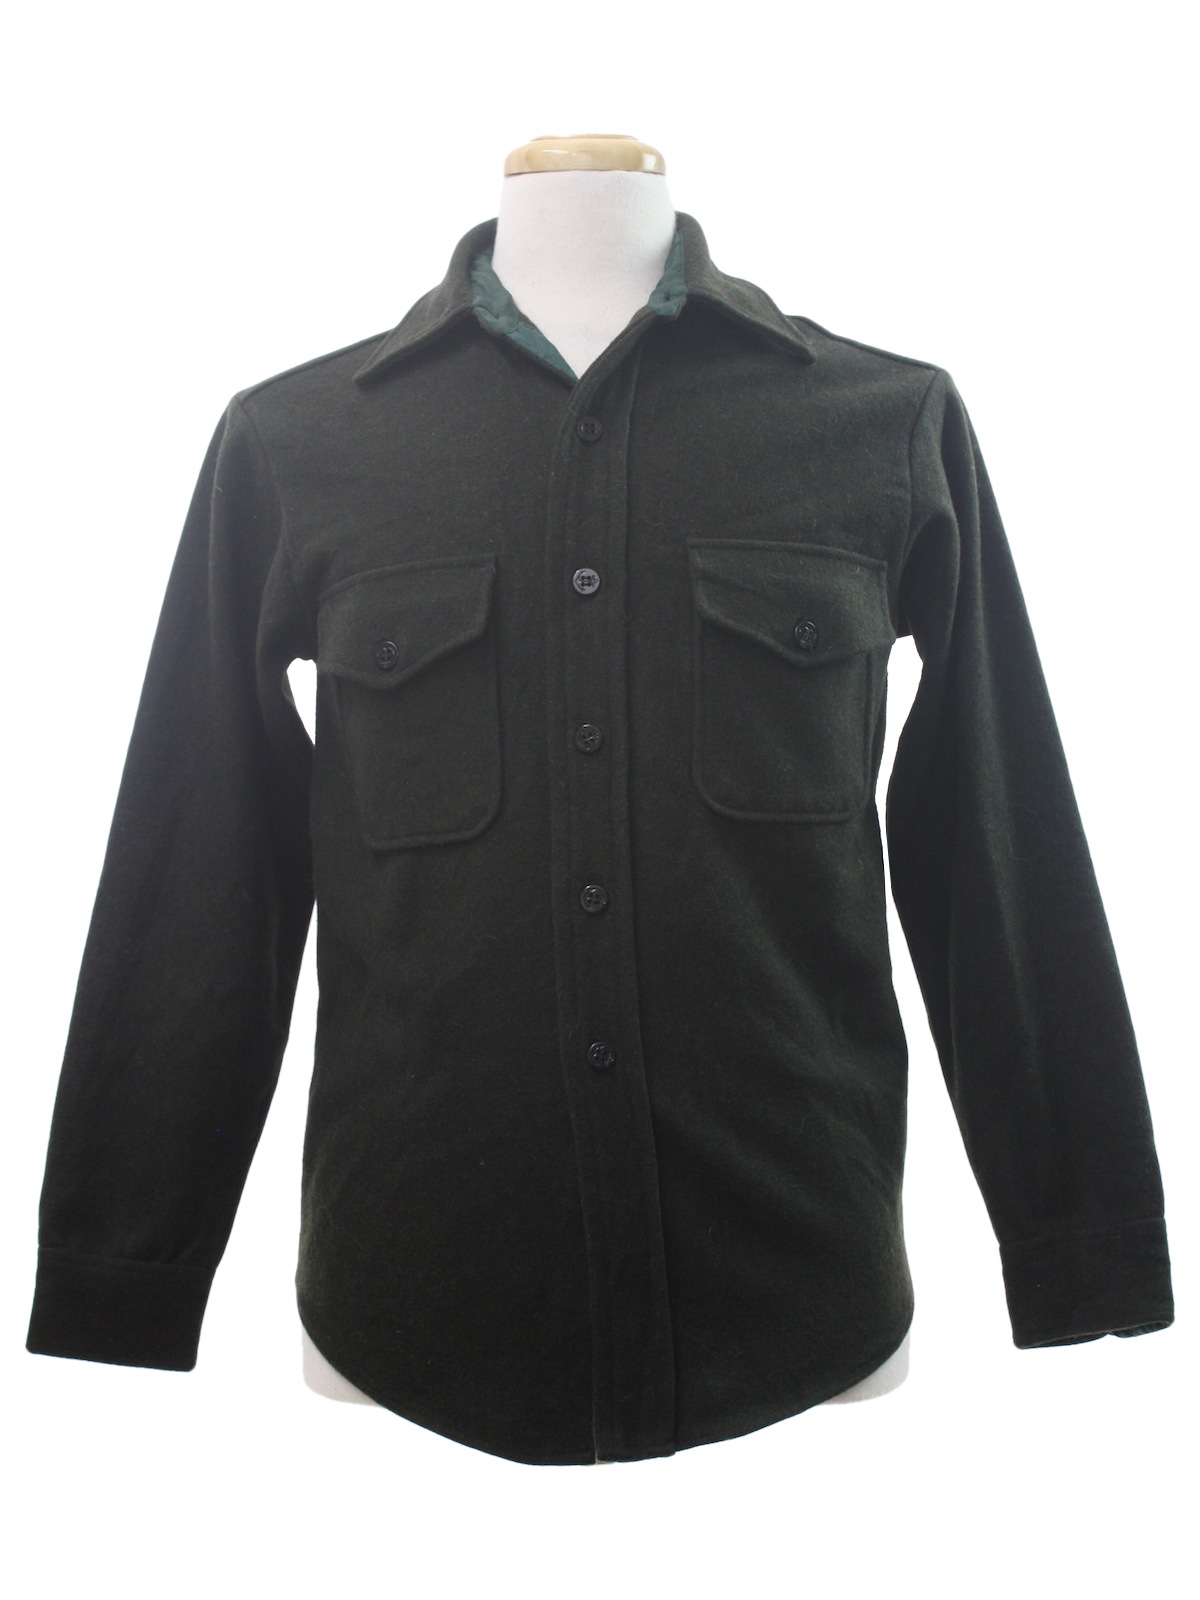 Retro 1960's Wool Shirt (Missing Label) : Late 60s -Missing Label- Mens ...